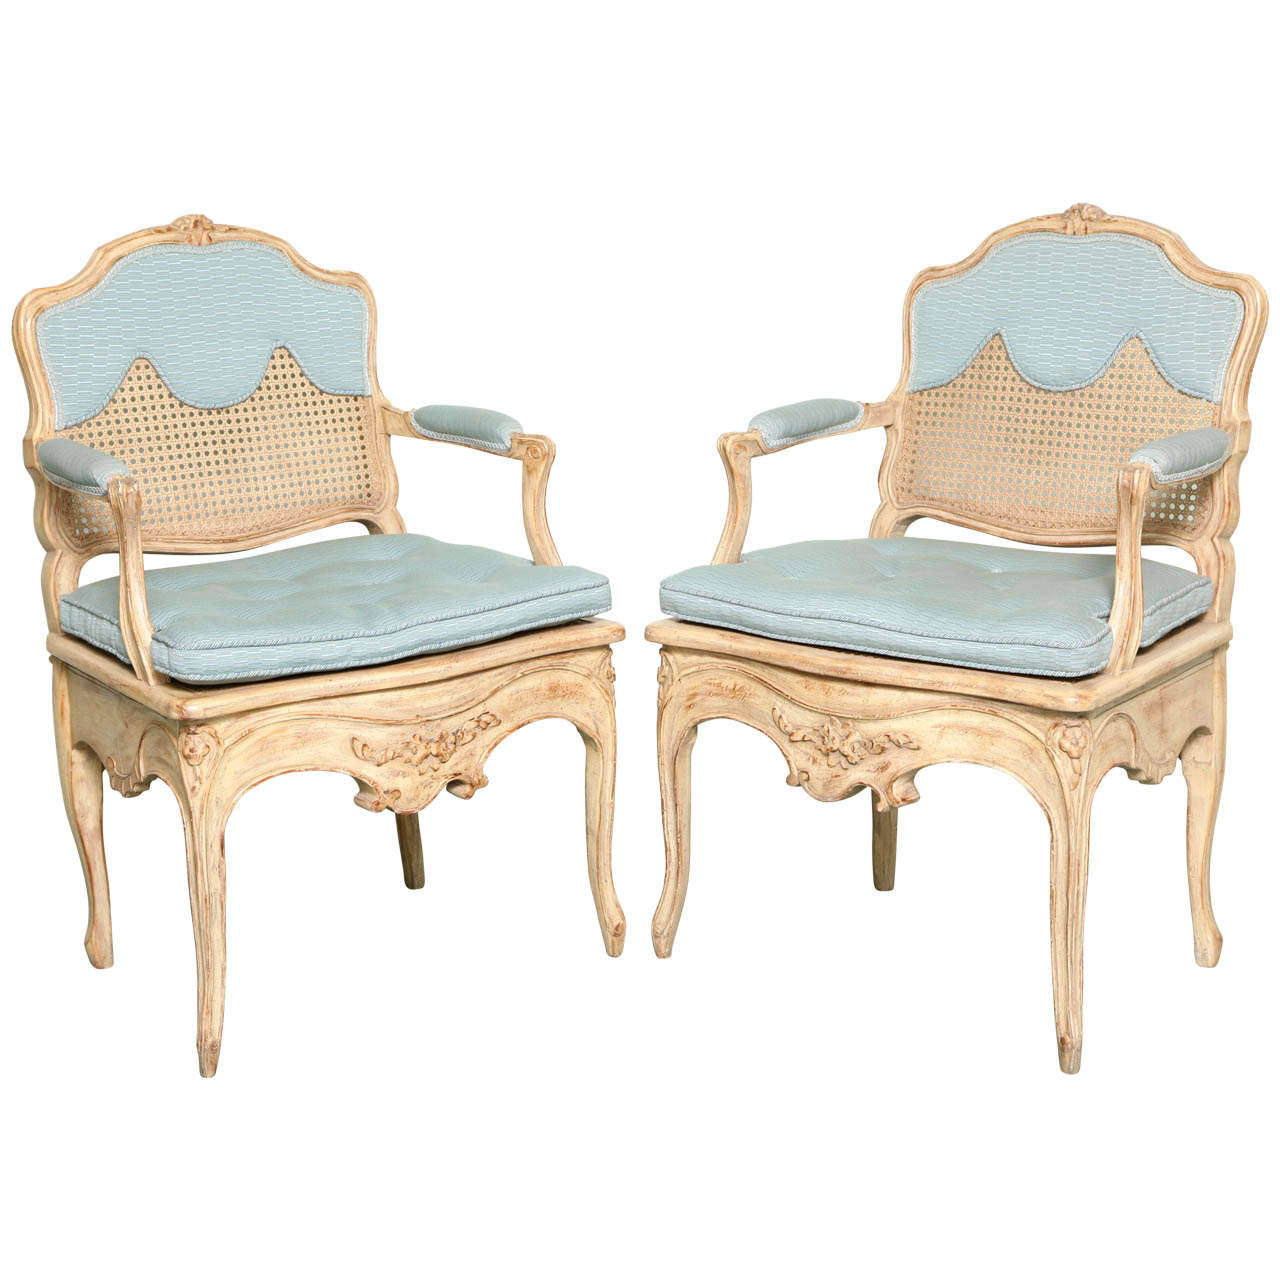 A Pair of Louis XV Style Caned and Painted Armchairs